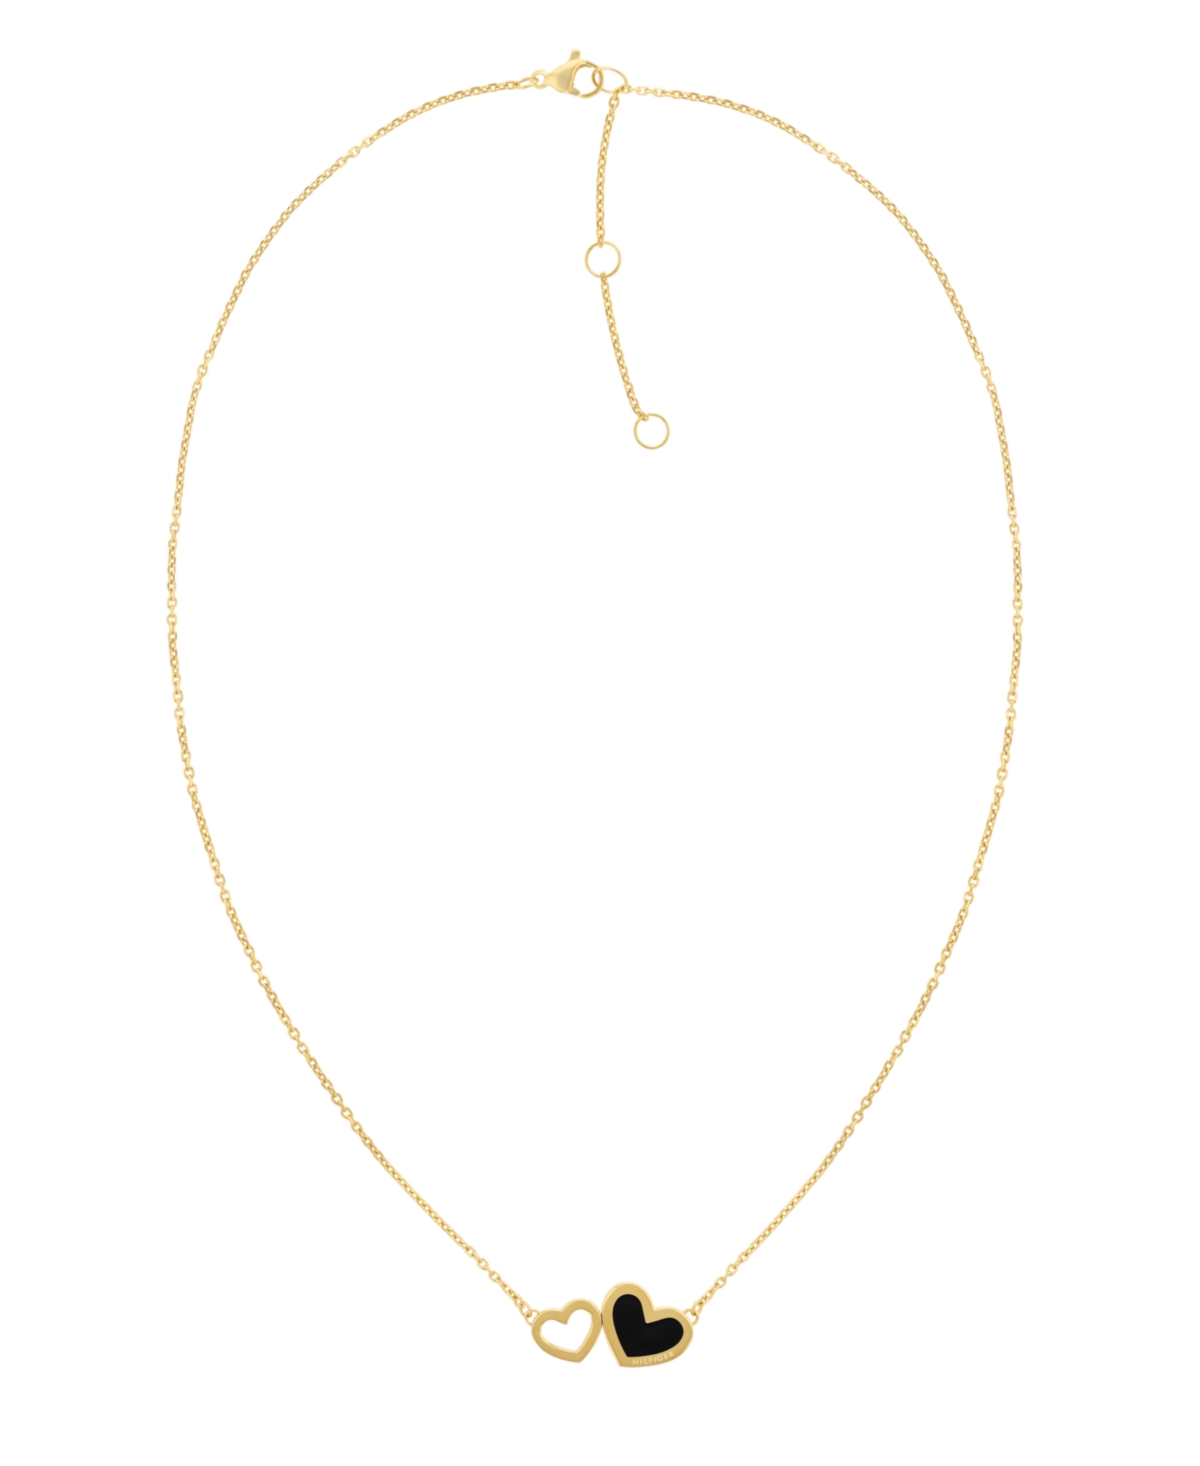 Enamel Heart Necklace in 18K Carnation Gold Plated - Silver